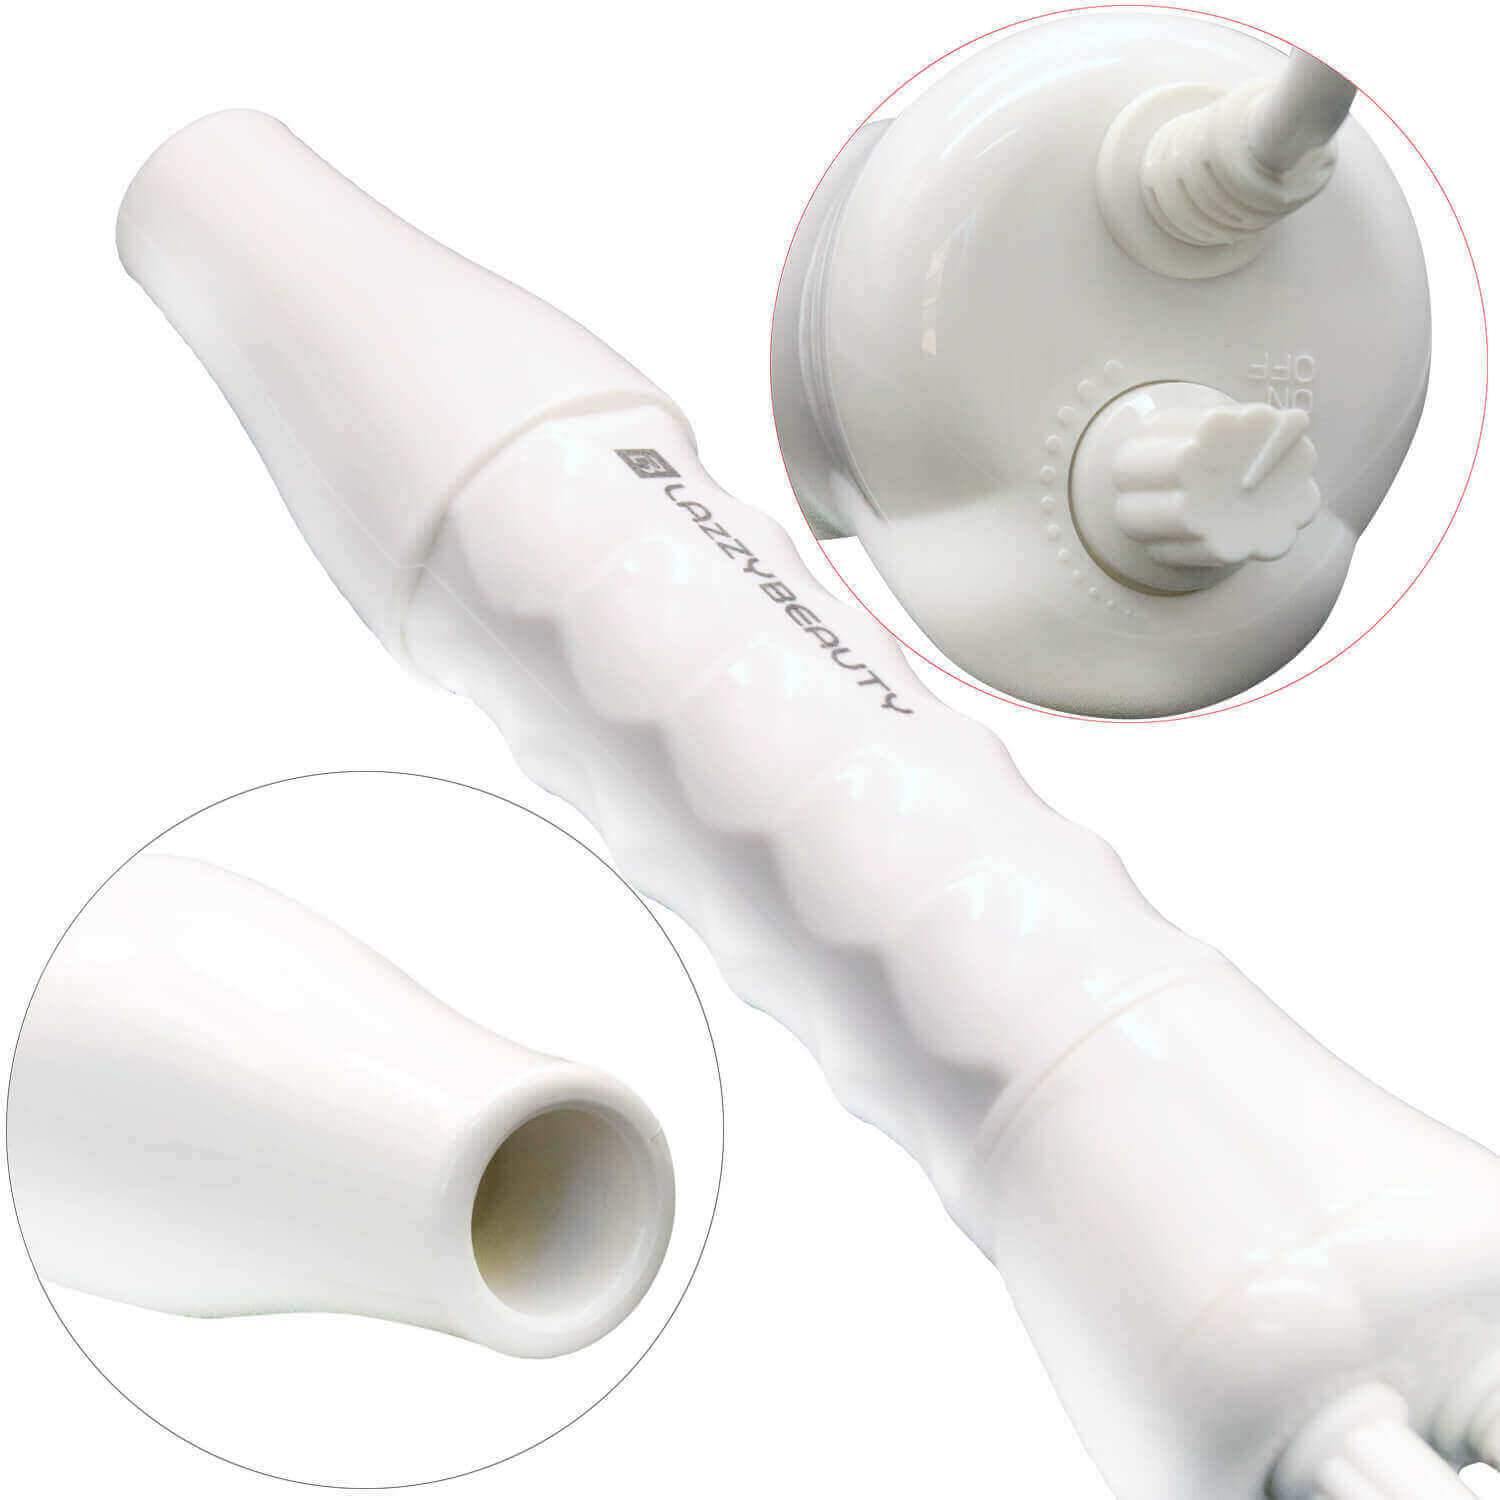 Argon Gas - 2 in 1 High Frequency Facial Skin Therapy Wand - Lazzybeauty